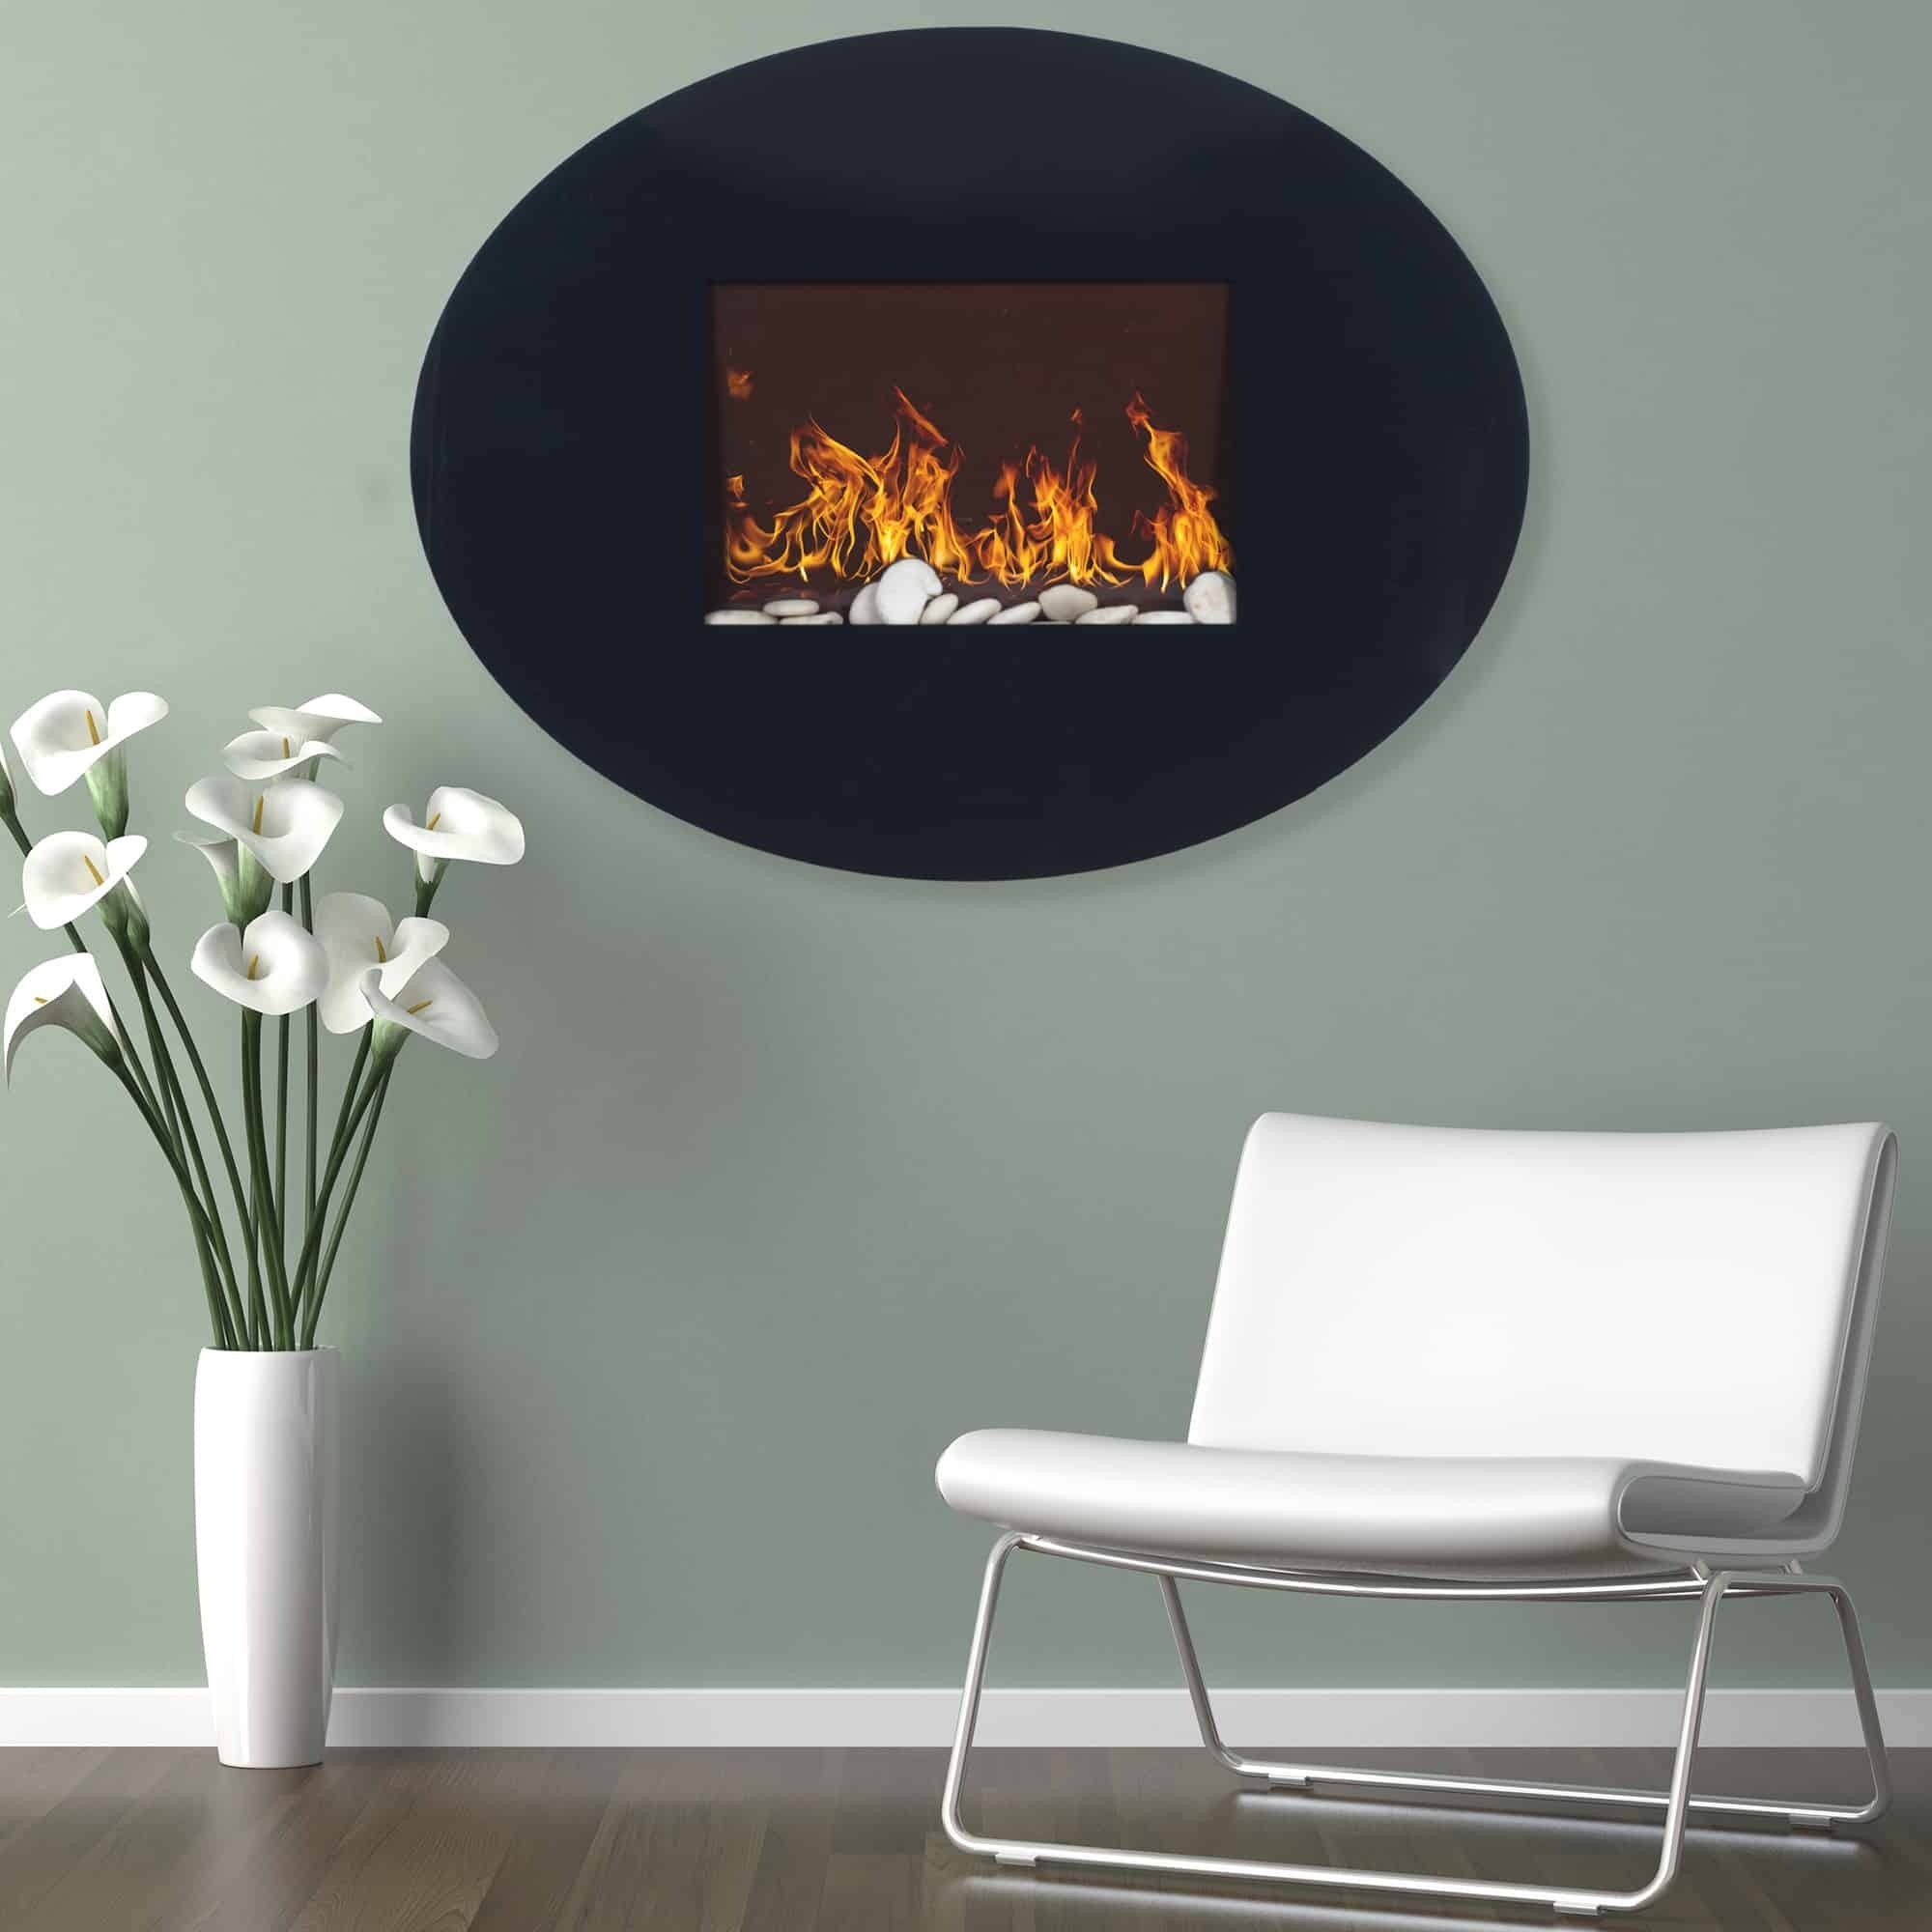 Oval Wall Mounted Electric Fireplace